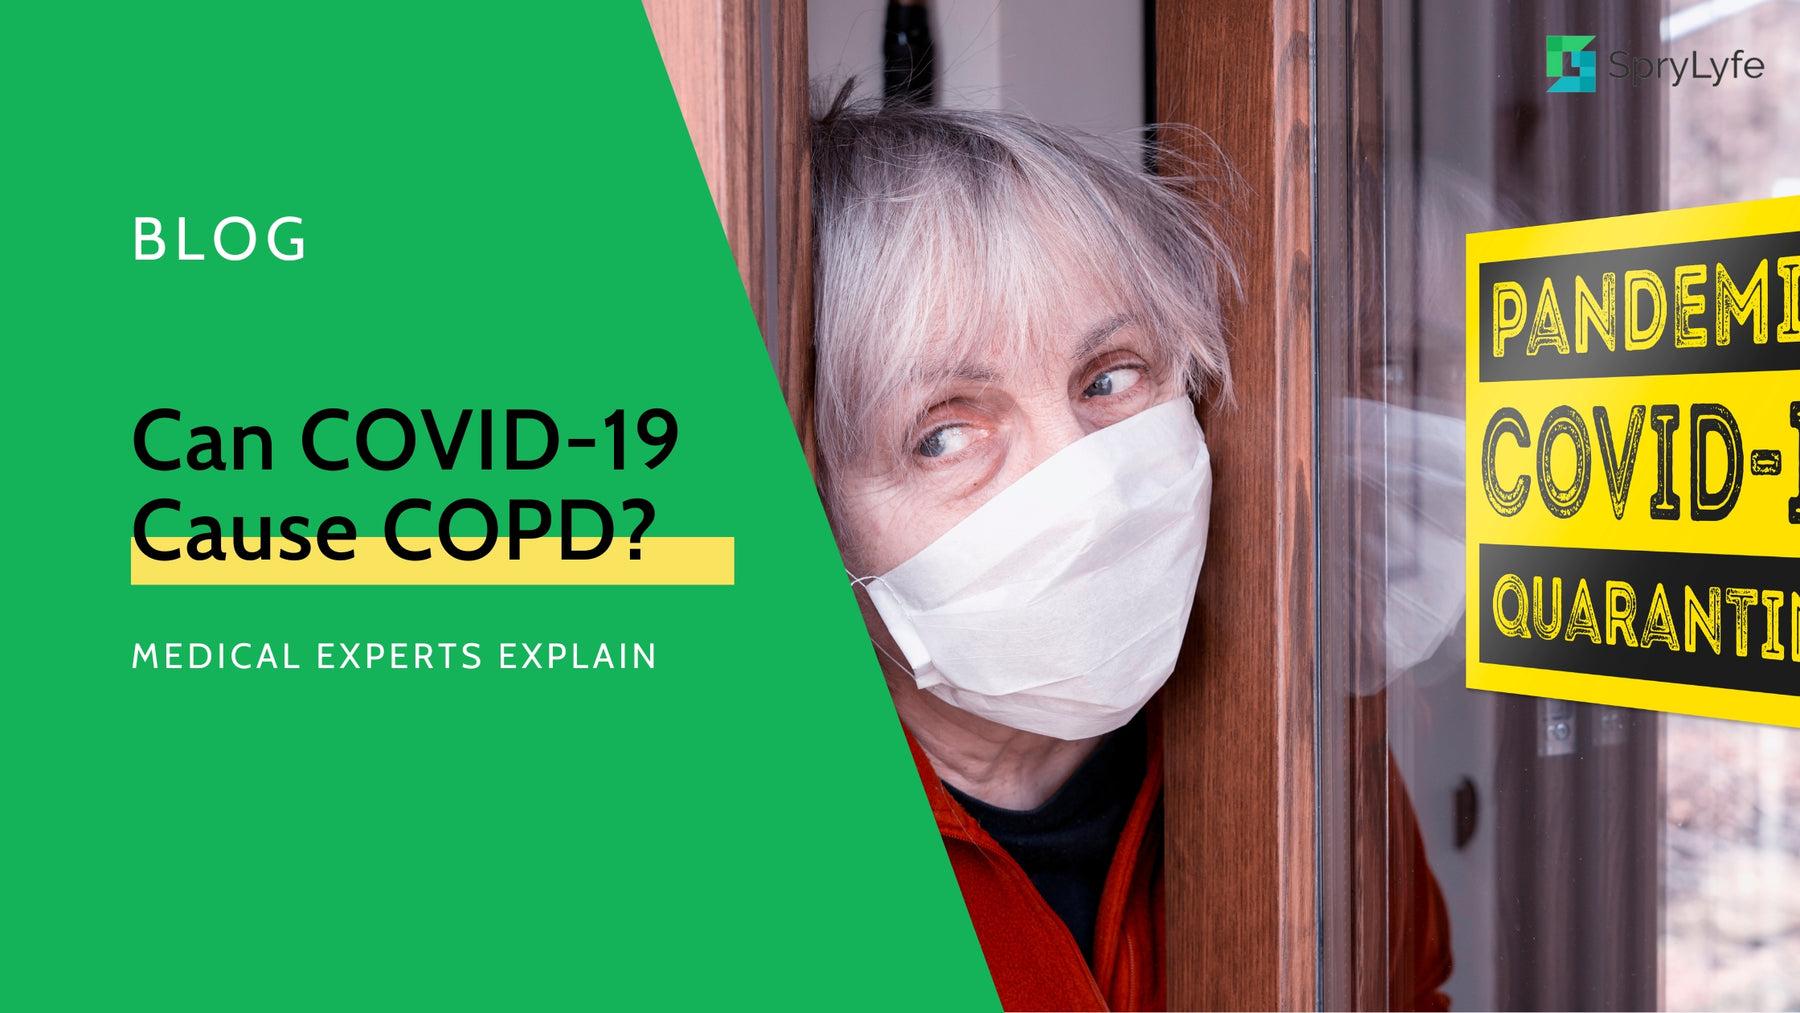 Does COVID-19 Cause COPD? [Medical Experts Explain]